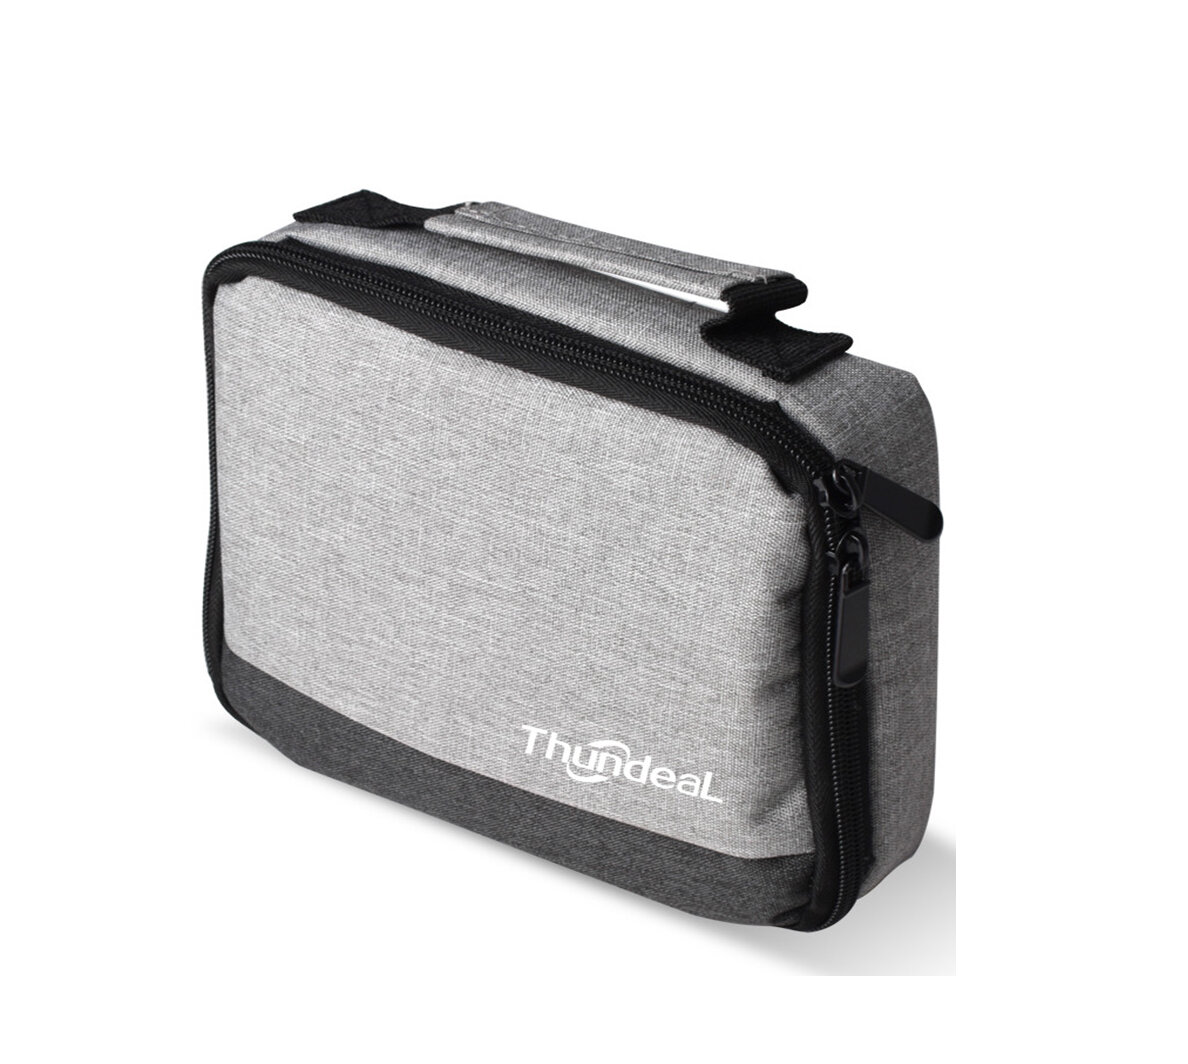 

Thundeal Mini DLP Gray Portable Projector Bag Hand Carrying Case Protective Travel for Projection Outdoor Movie